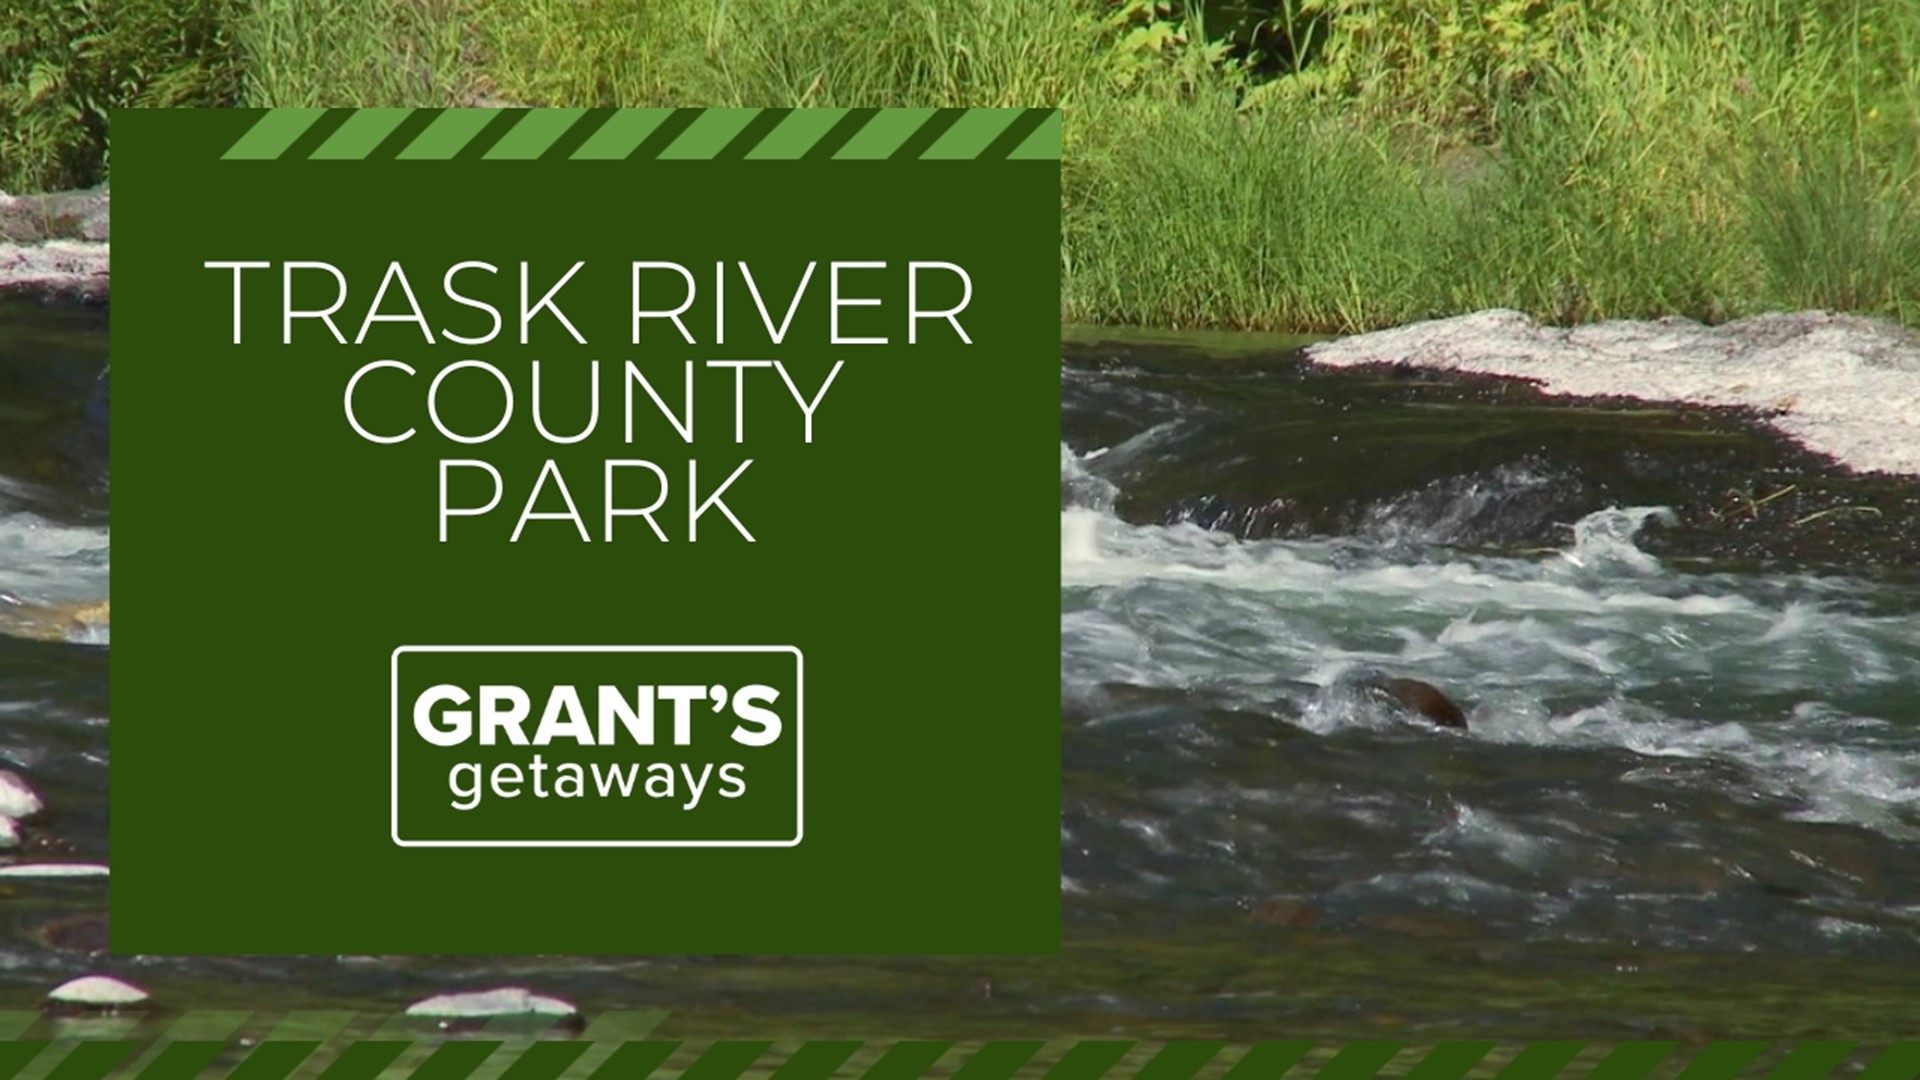 Trask River County Park, one of the easiest campgrounds to reach in Tillamook County, is a sprawling, forested affair with 60 campsites.